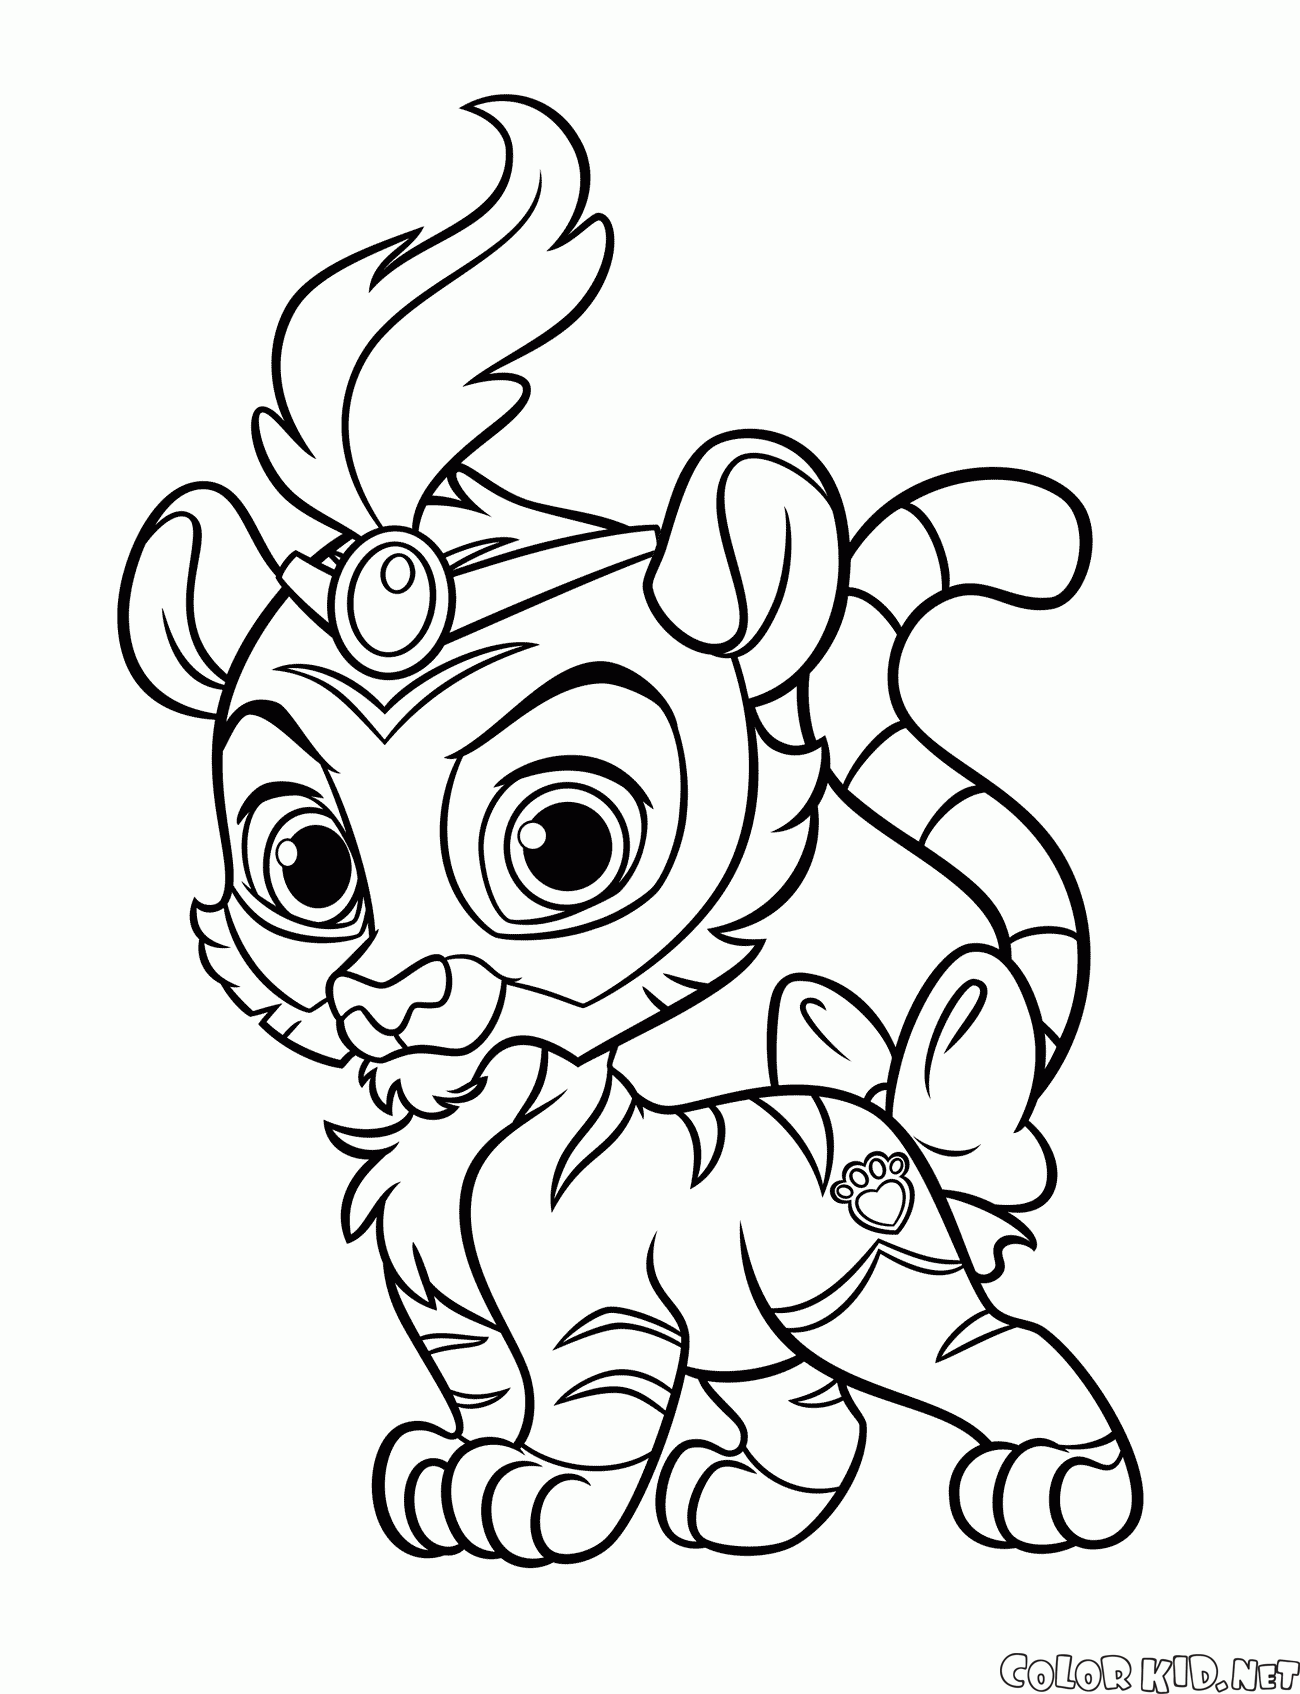 Coloring page - Palace pets